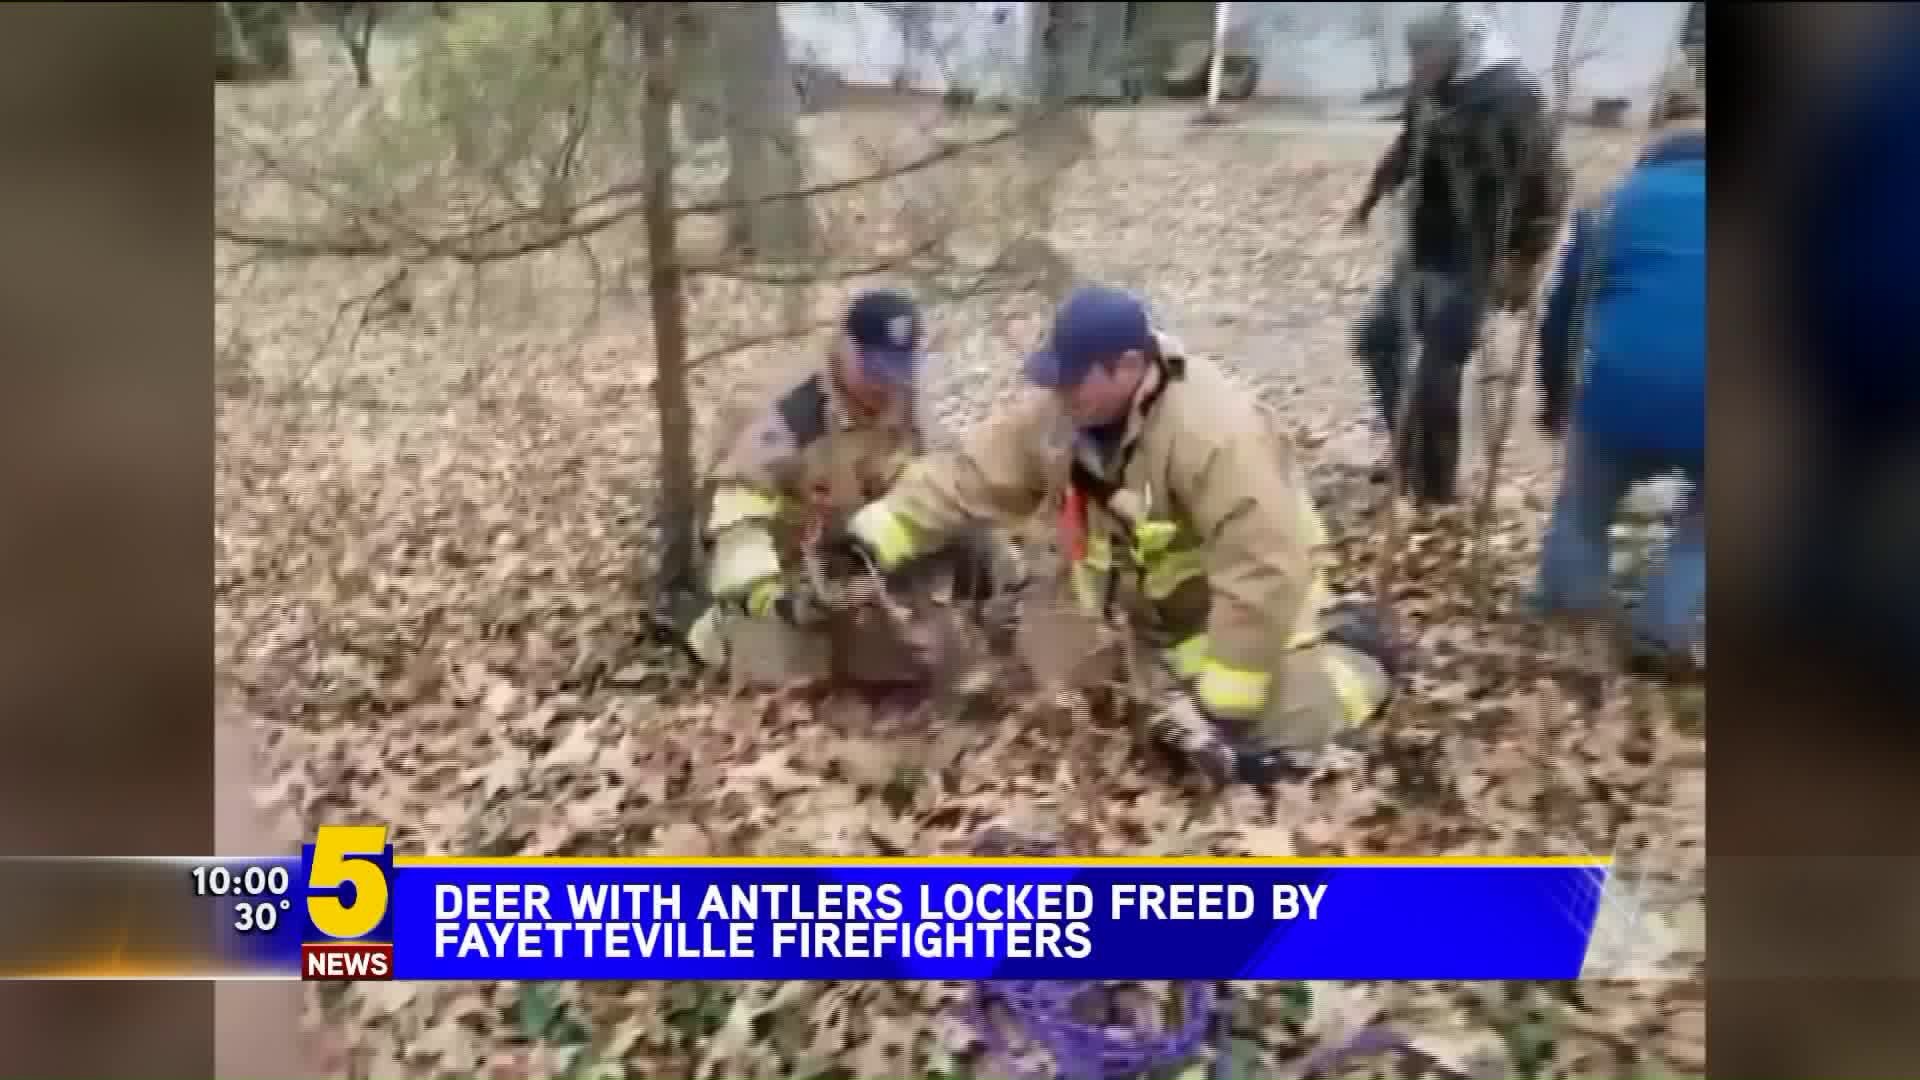 Deer With Antlers Locked Freed By Fayetteville Firefighters